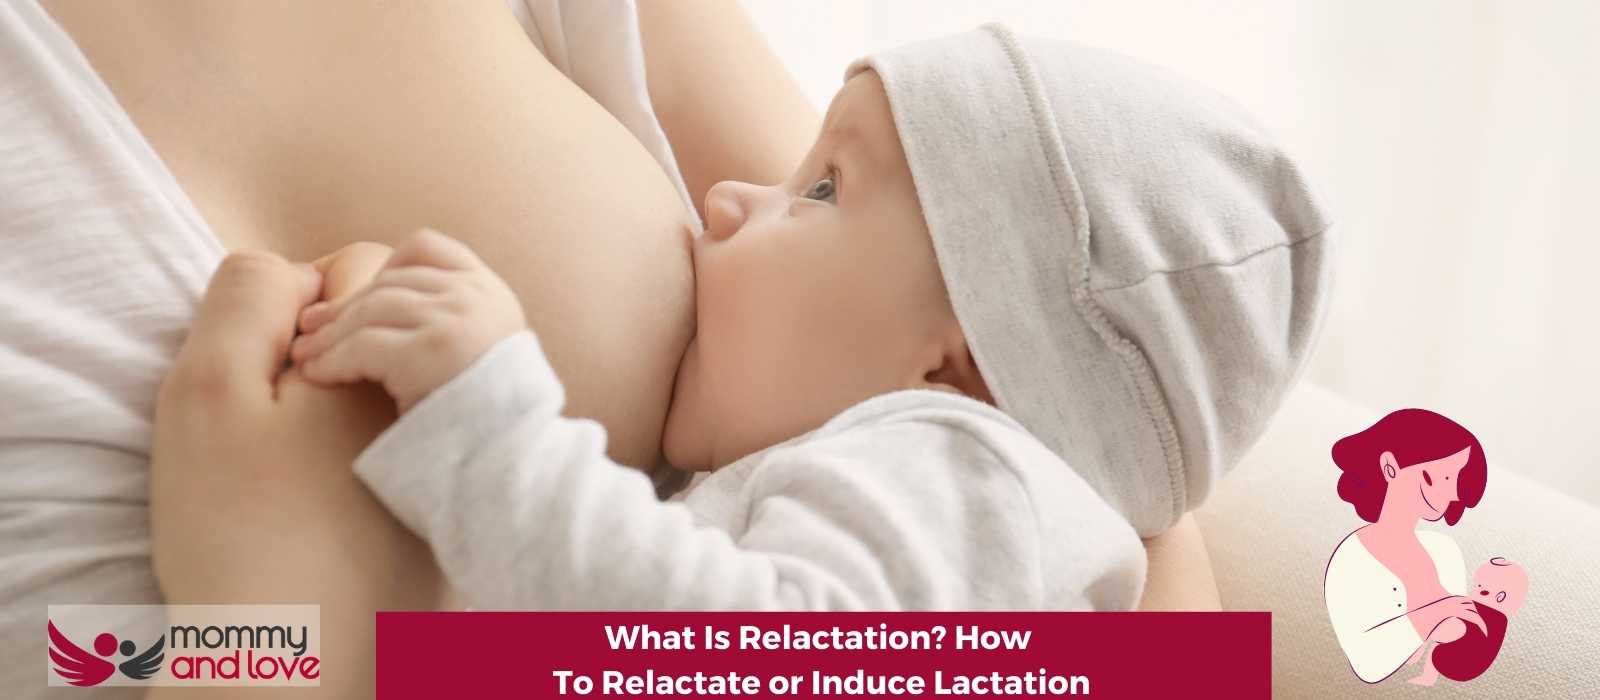 What Is Relactation? How To Relactate or Induce Lactation